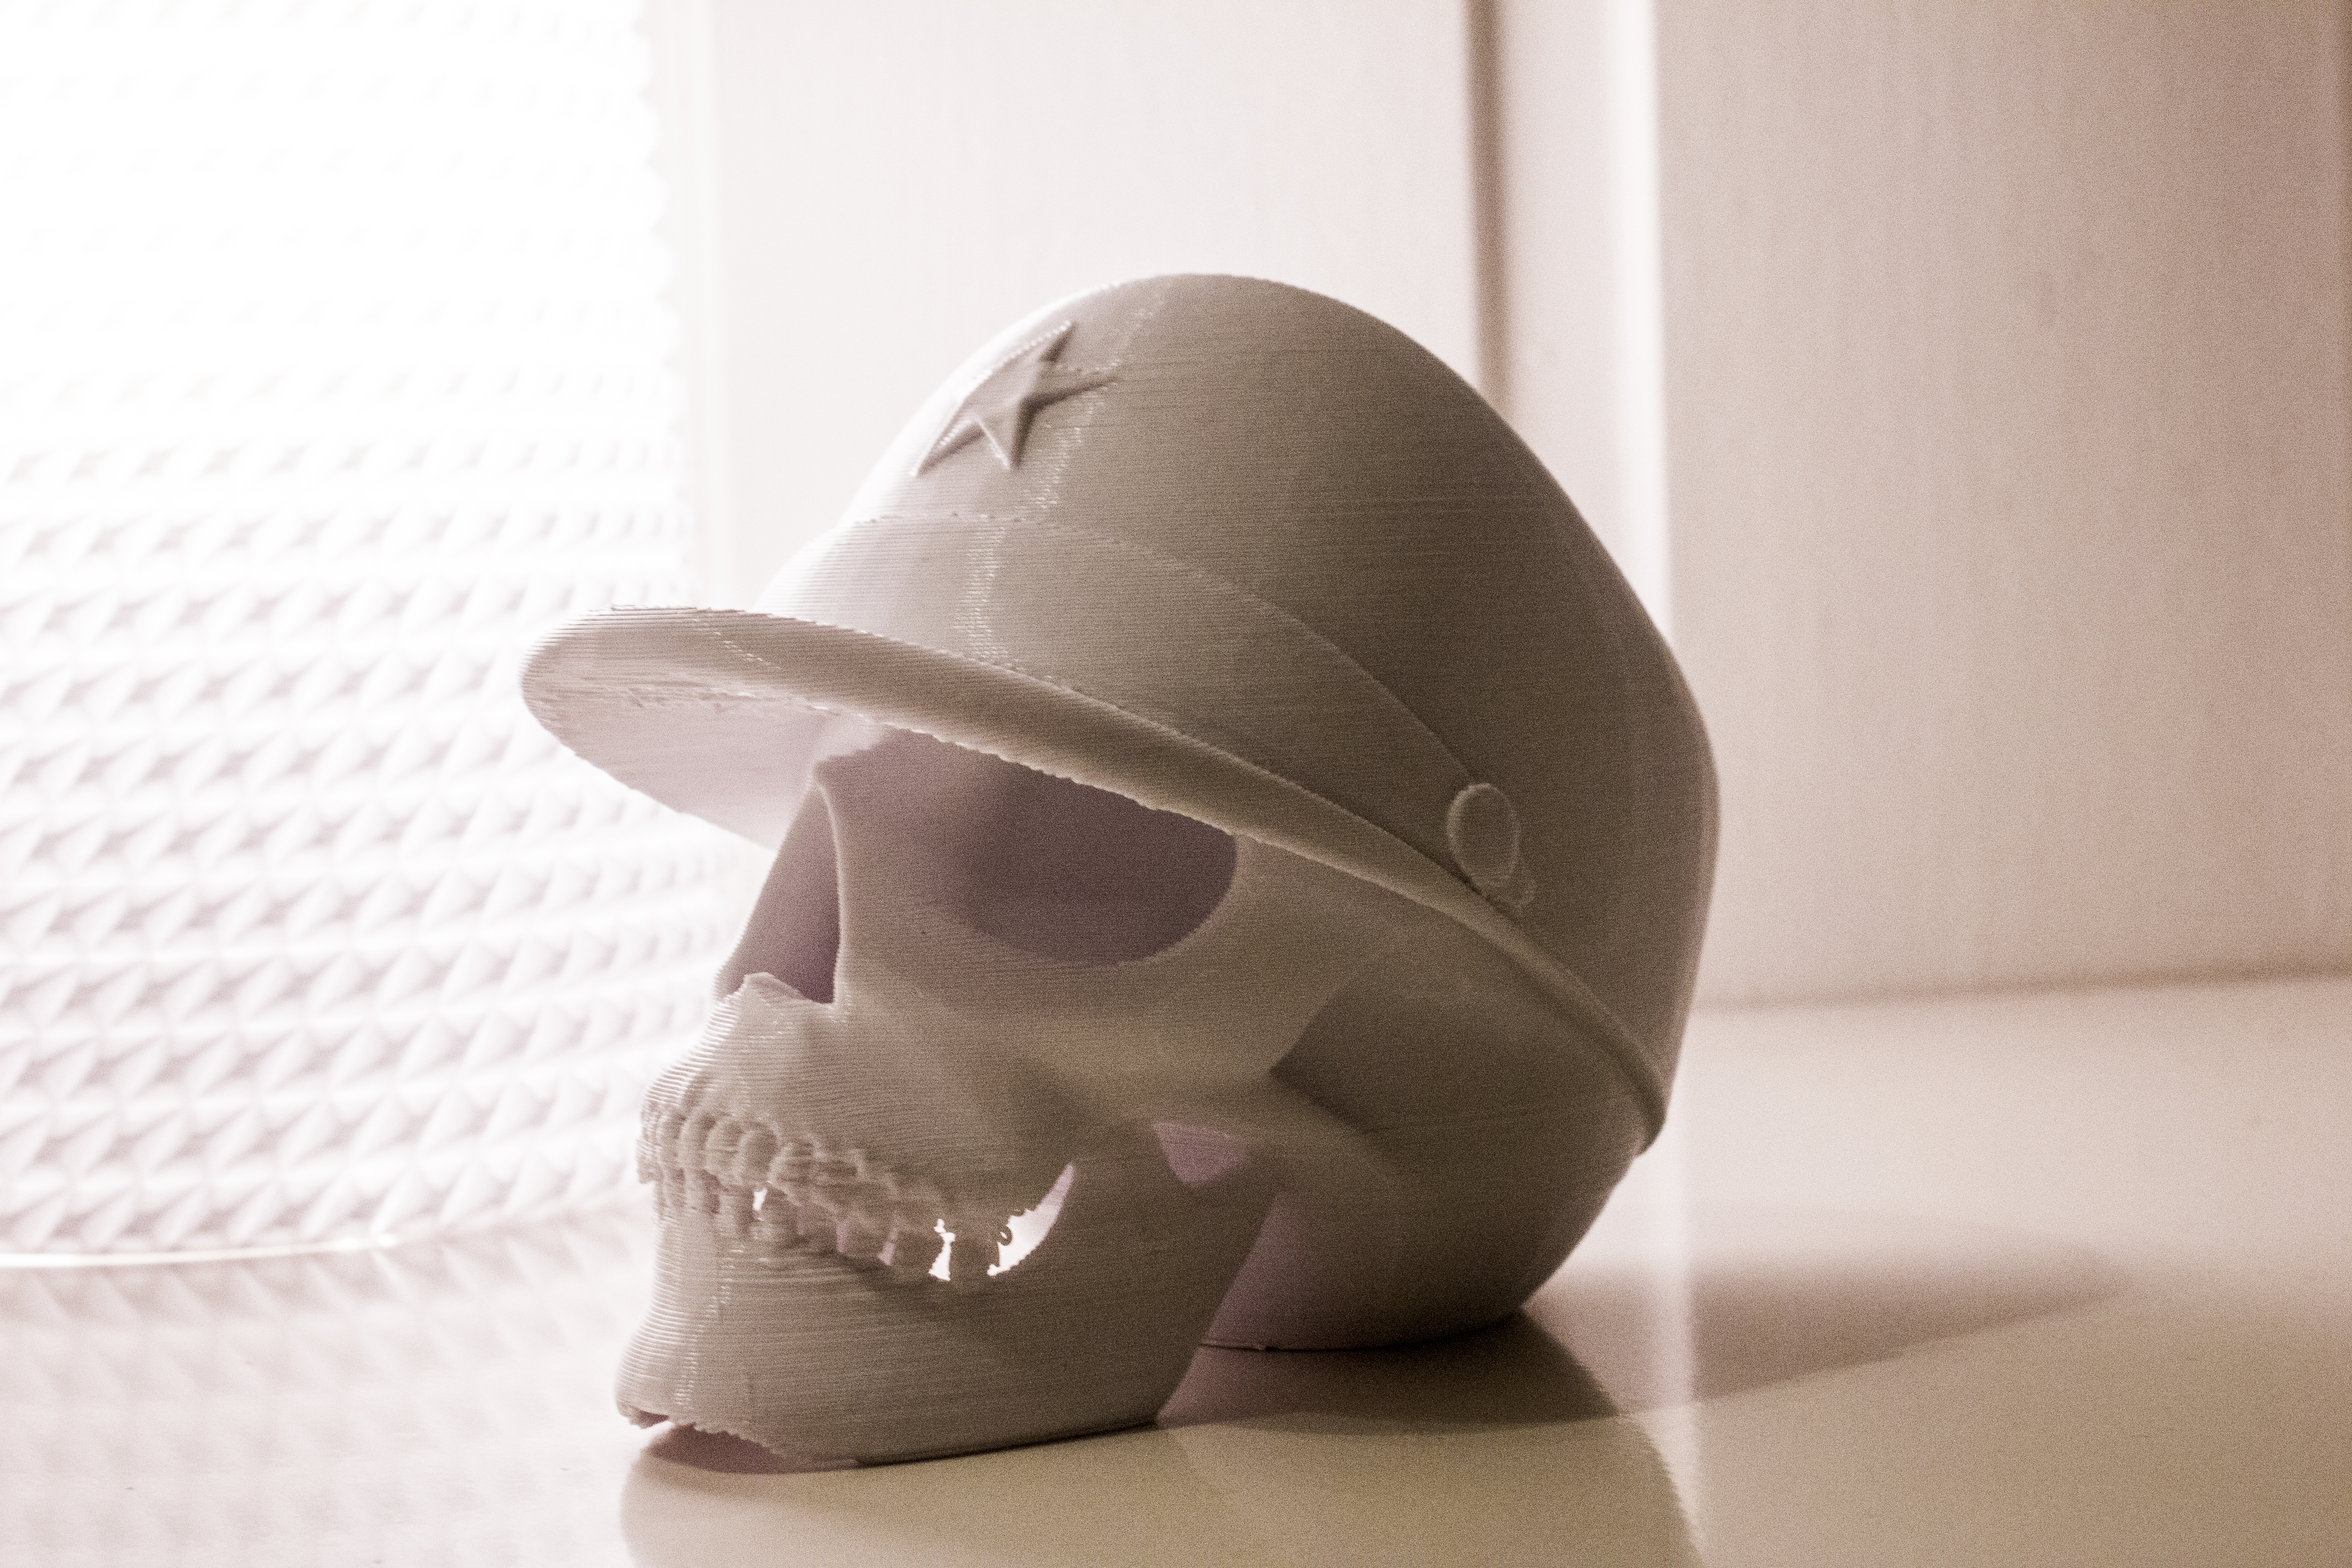 Skull with military cap